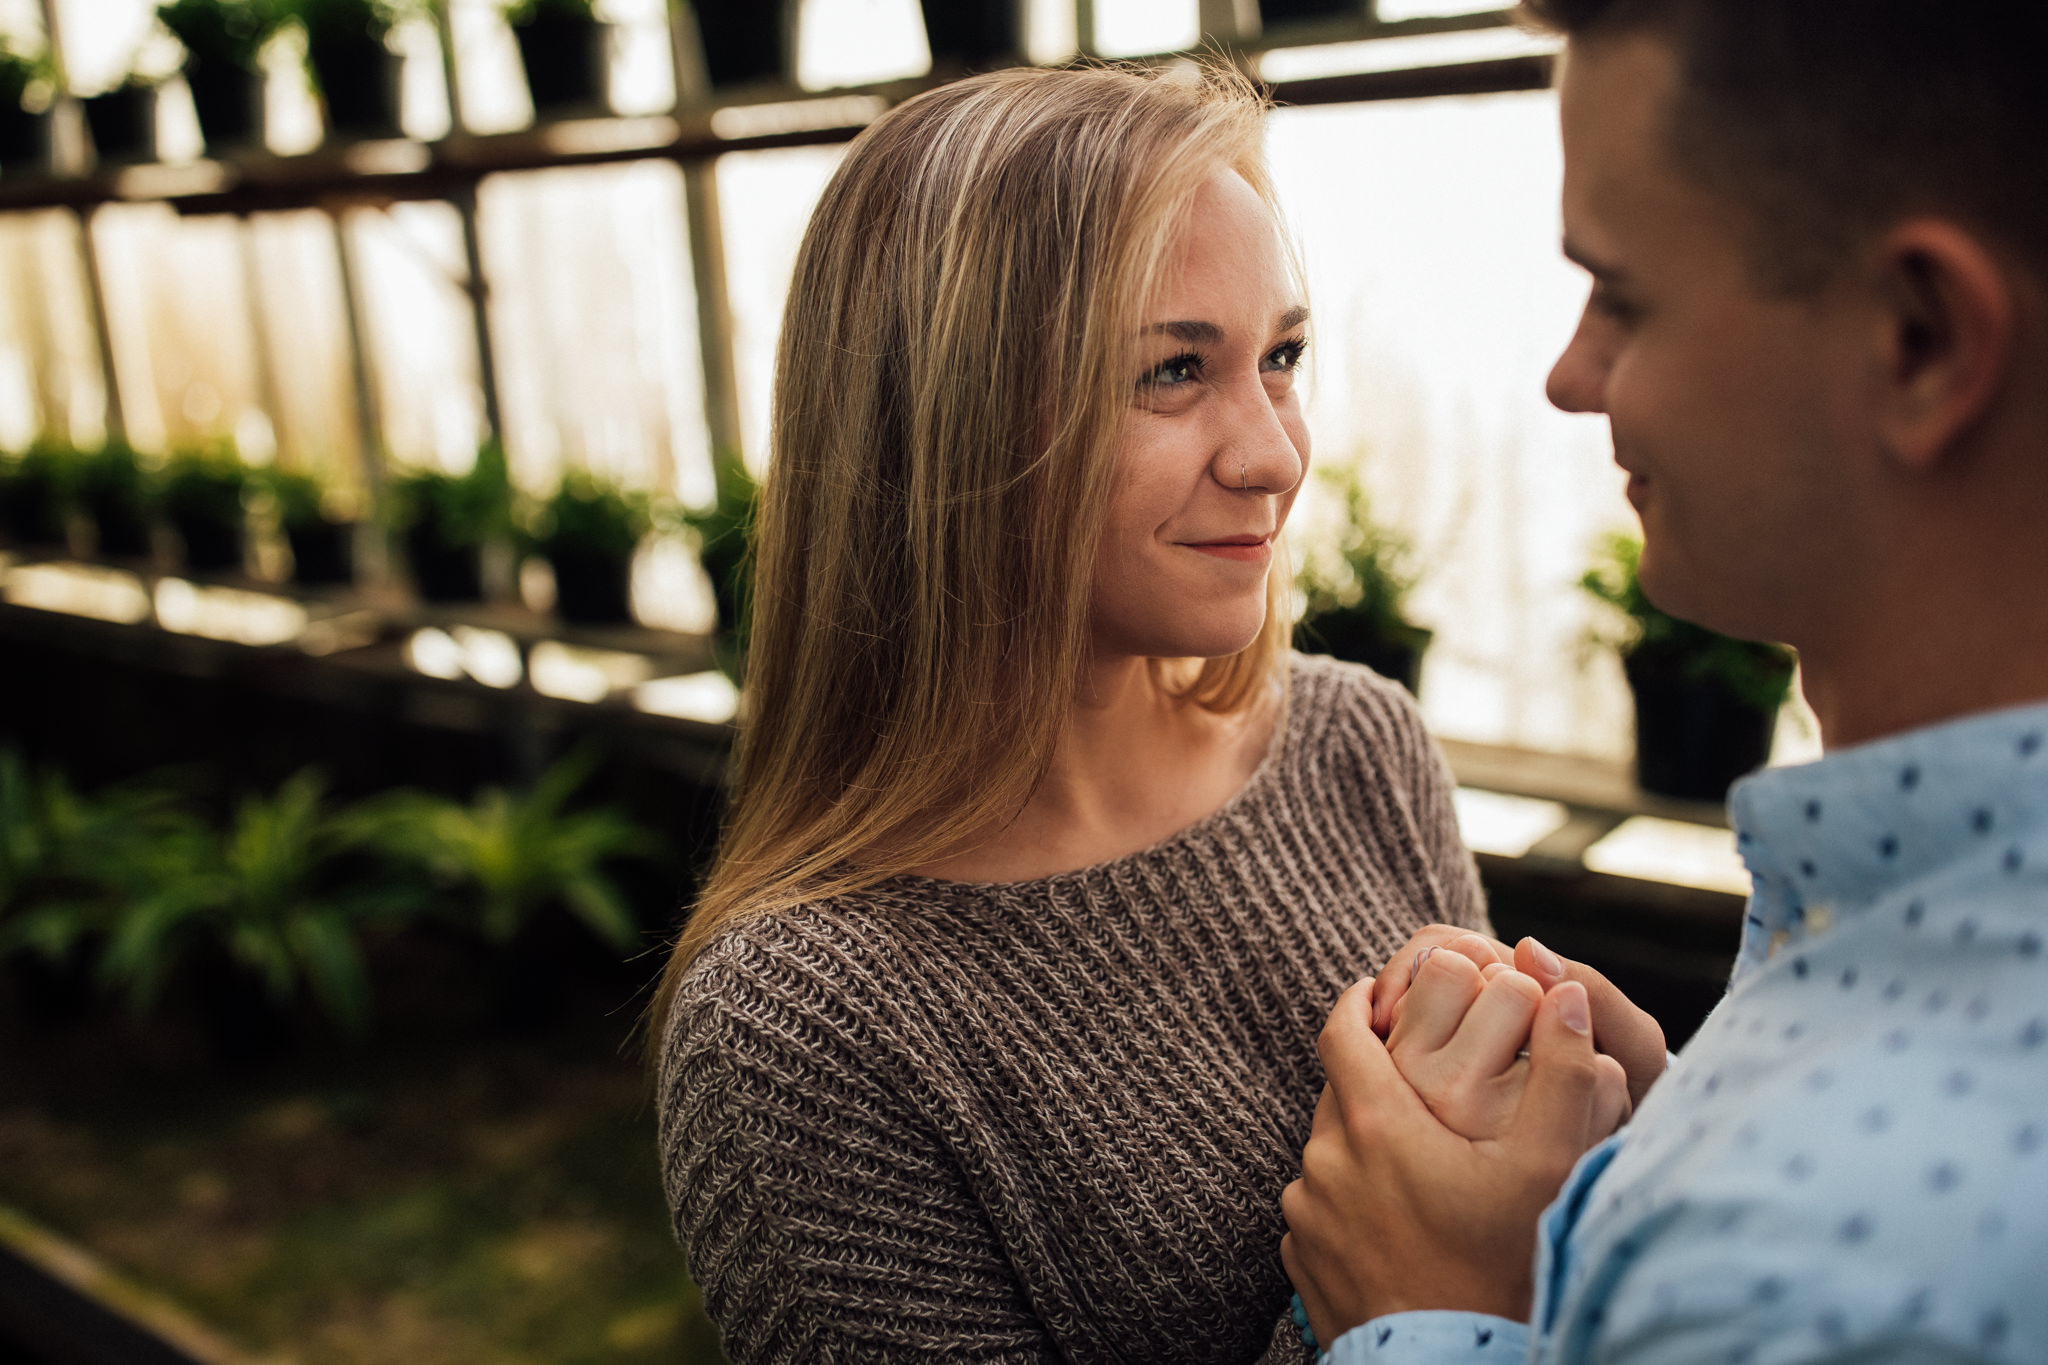 memphis-engagement-photographer-thewarmtharoundyou-greenhouse-engagement-pictures (30 of 118).jpg